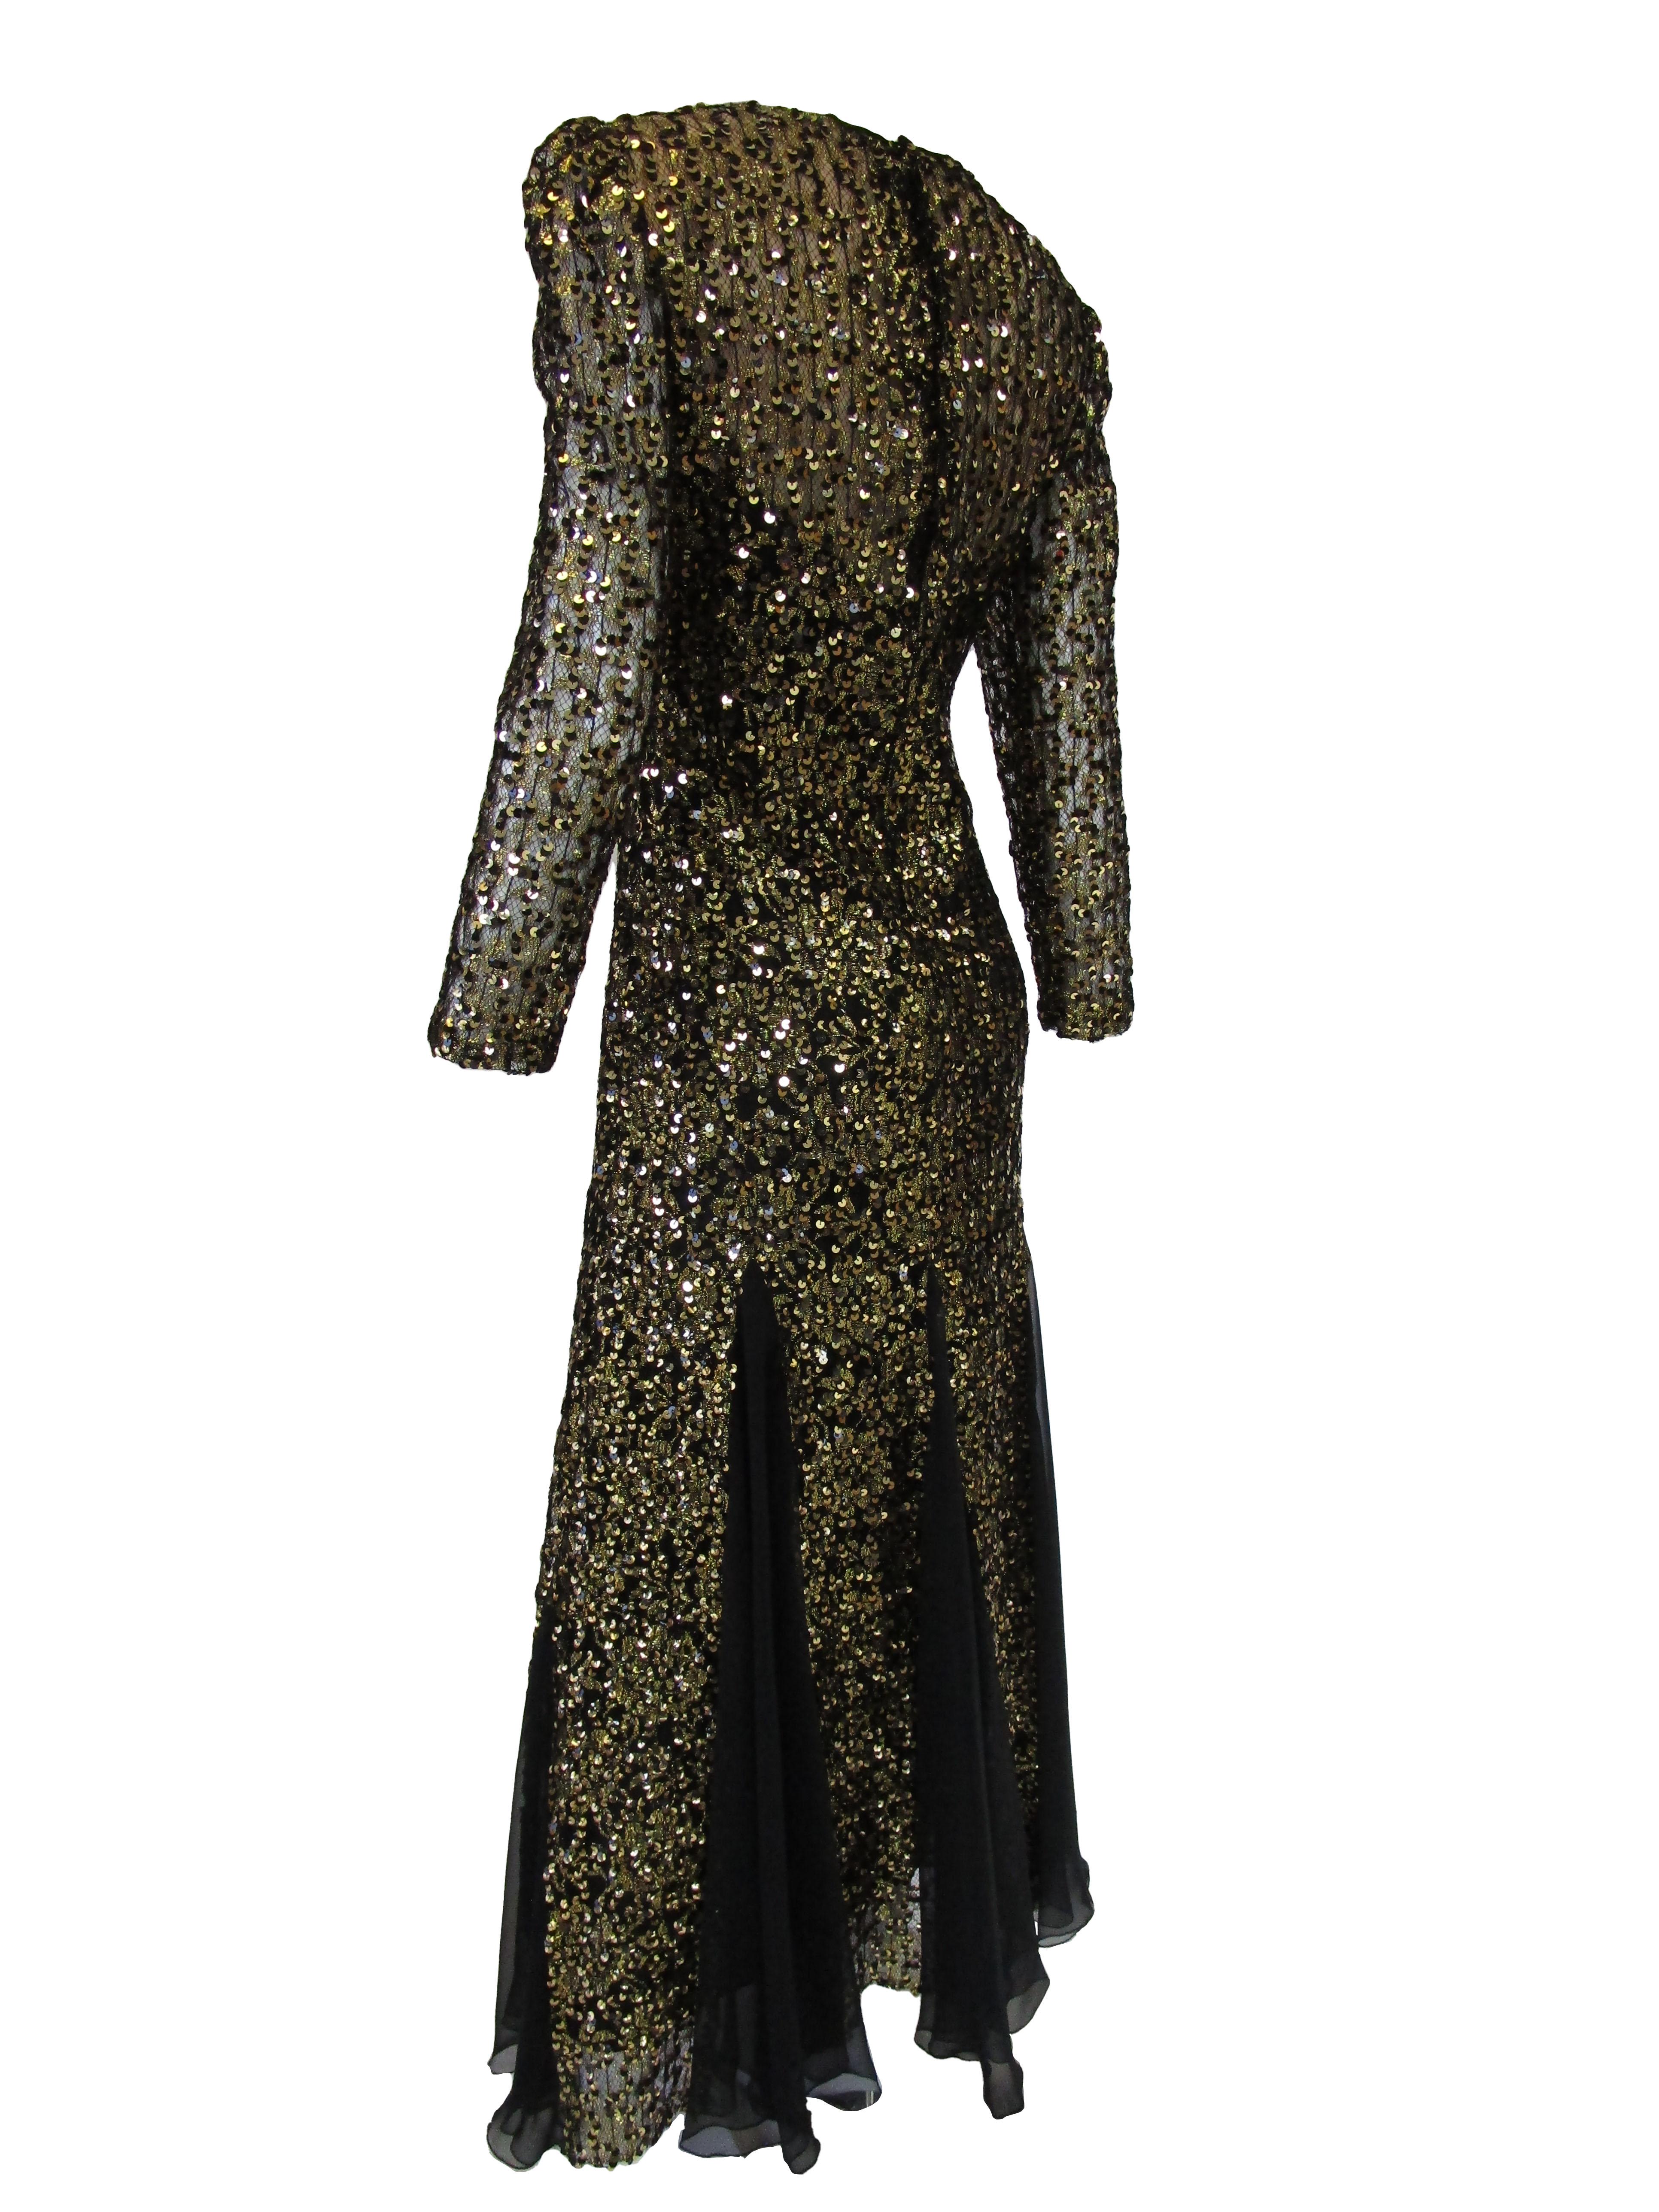 1980s Richilene Black and Gold Sequined Evening Dress  For Sale 3